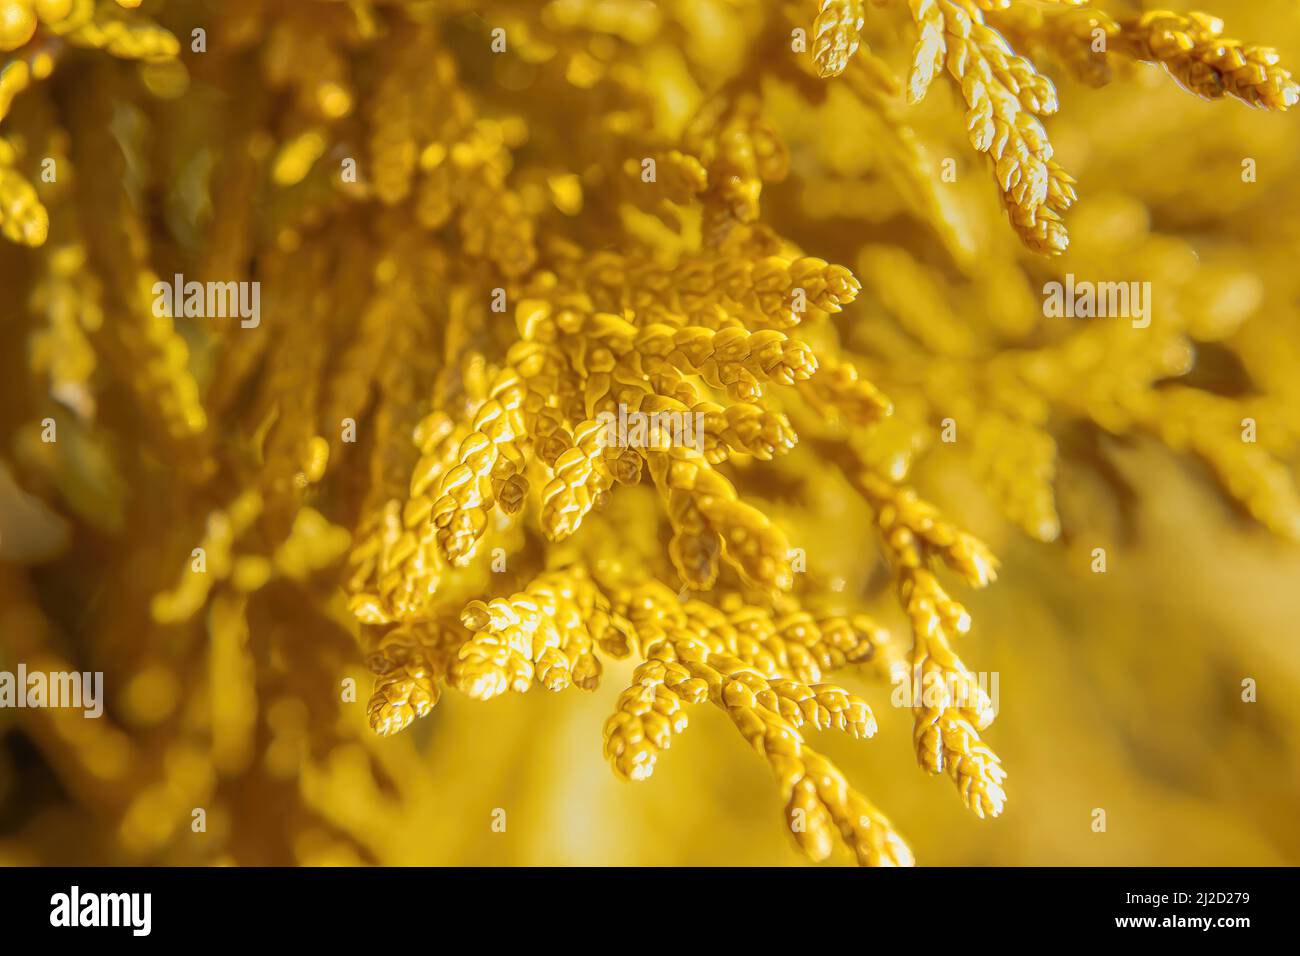 Thuja occidentalis known as gold drop shines brightly with the sun shining today Stock Photo